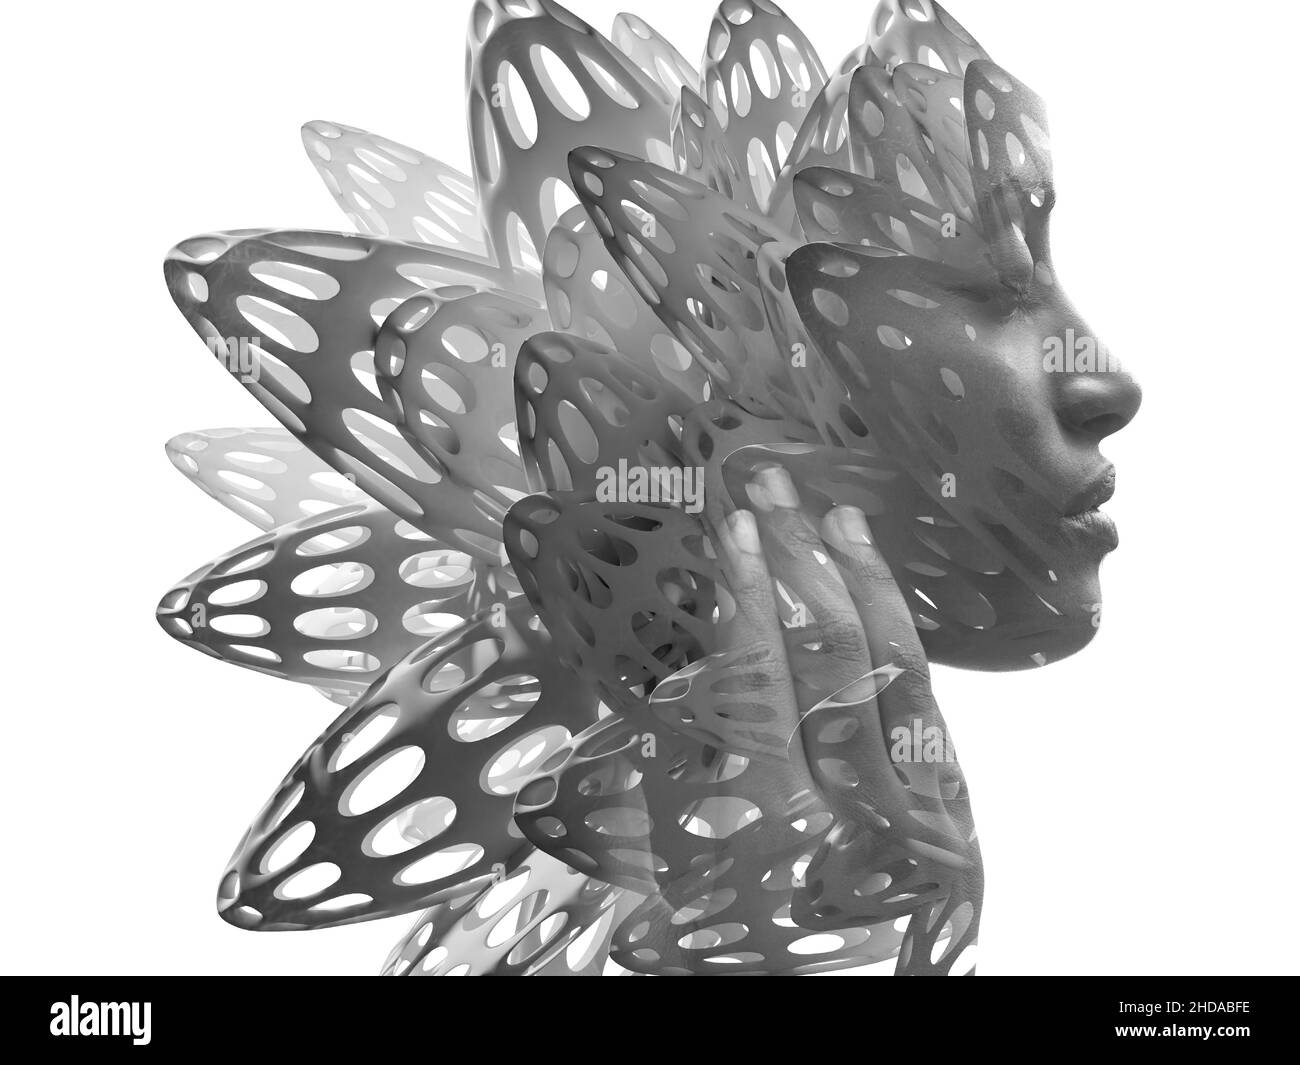 A portrait of an African American woman combined with abstract 3D figures. Stock Photo